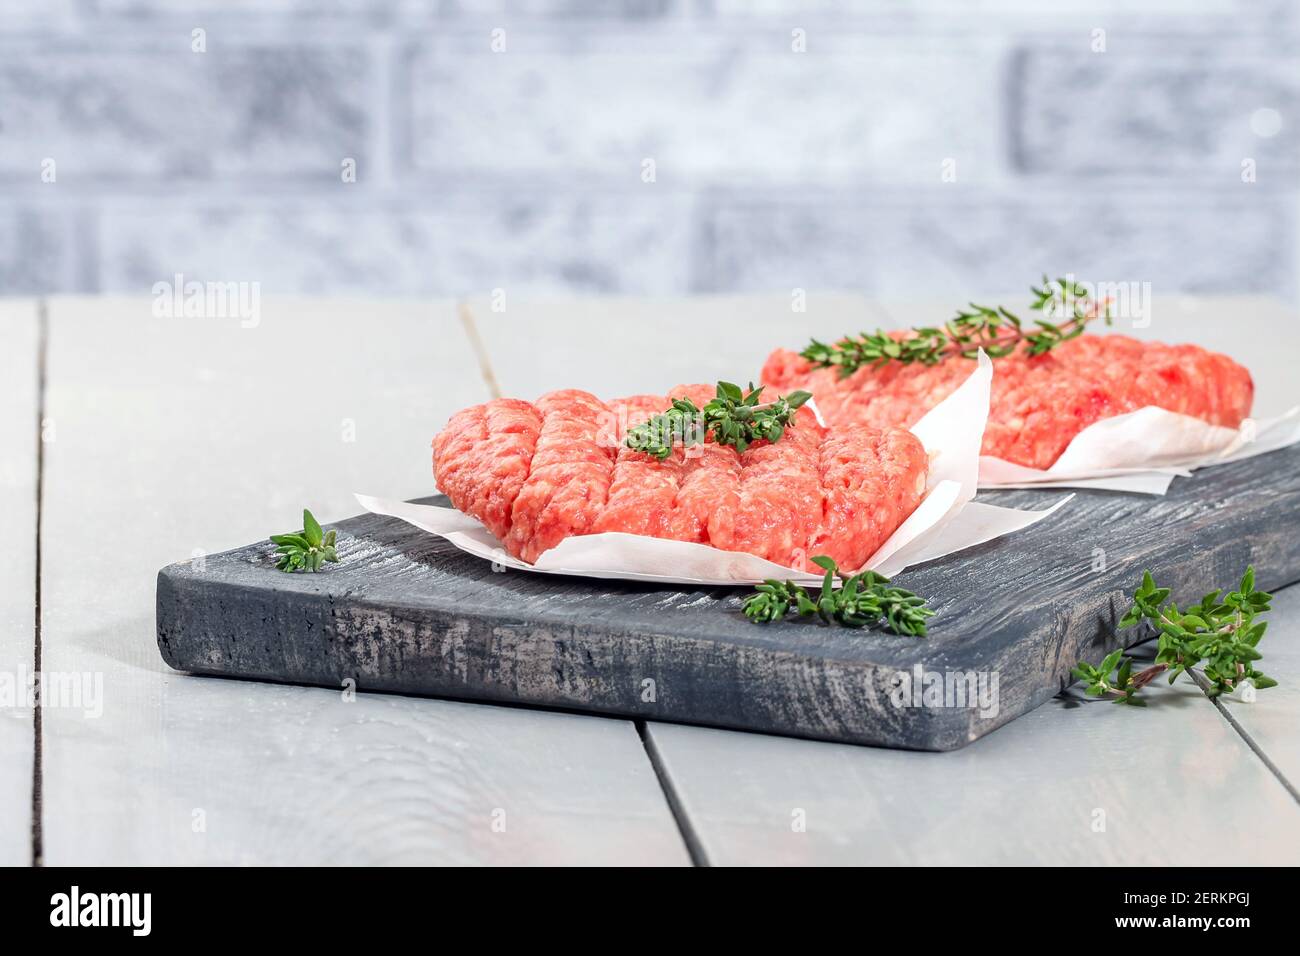 Raw minced beef patties for burgers. Raw meat for hamburgers. Beef cutlets. Stock Photo